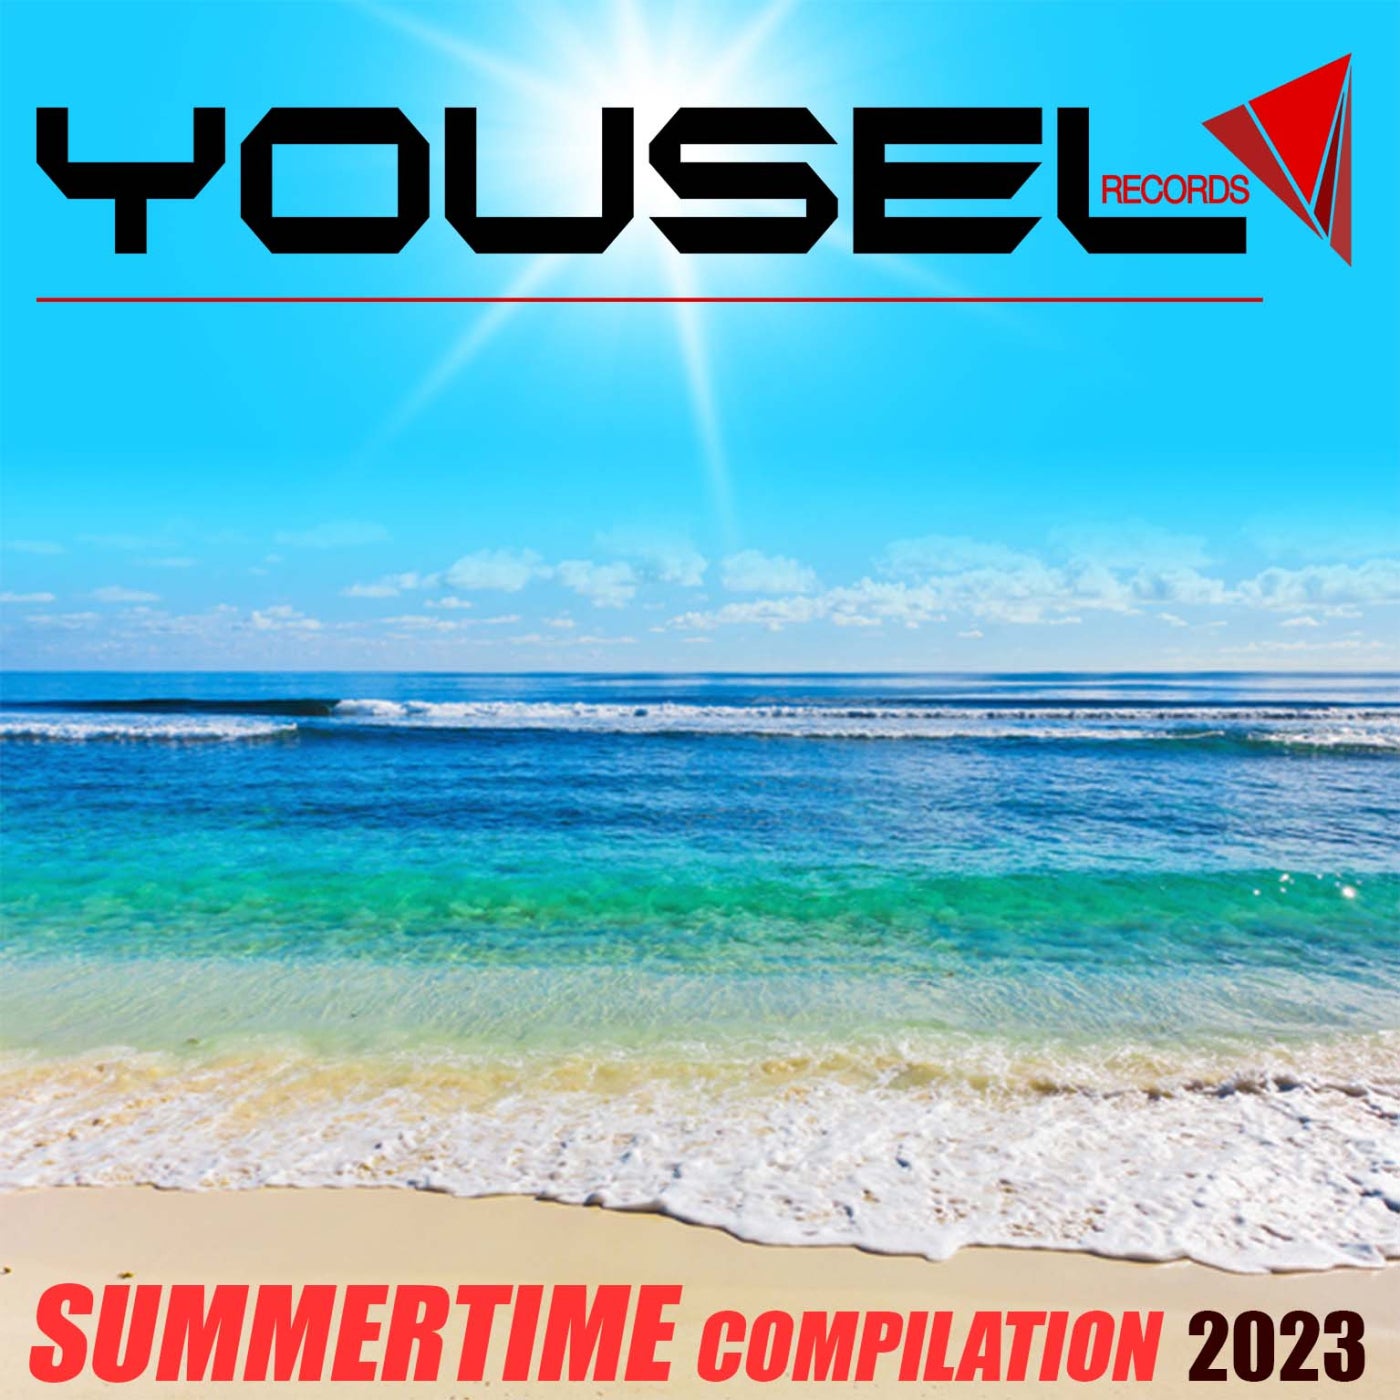 Yousel Summertime Compilation 2023